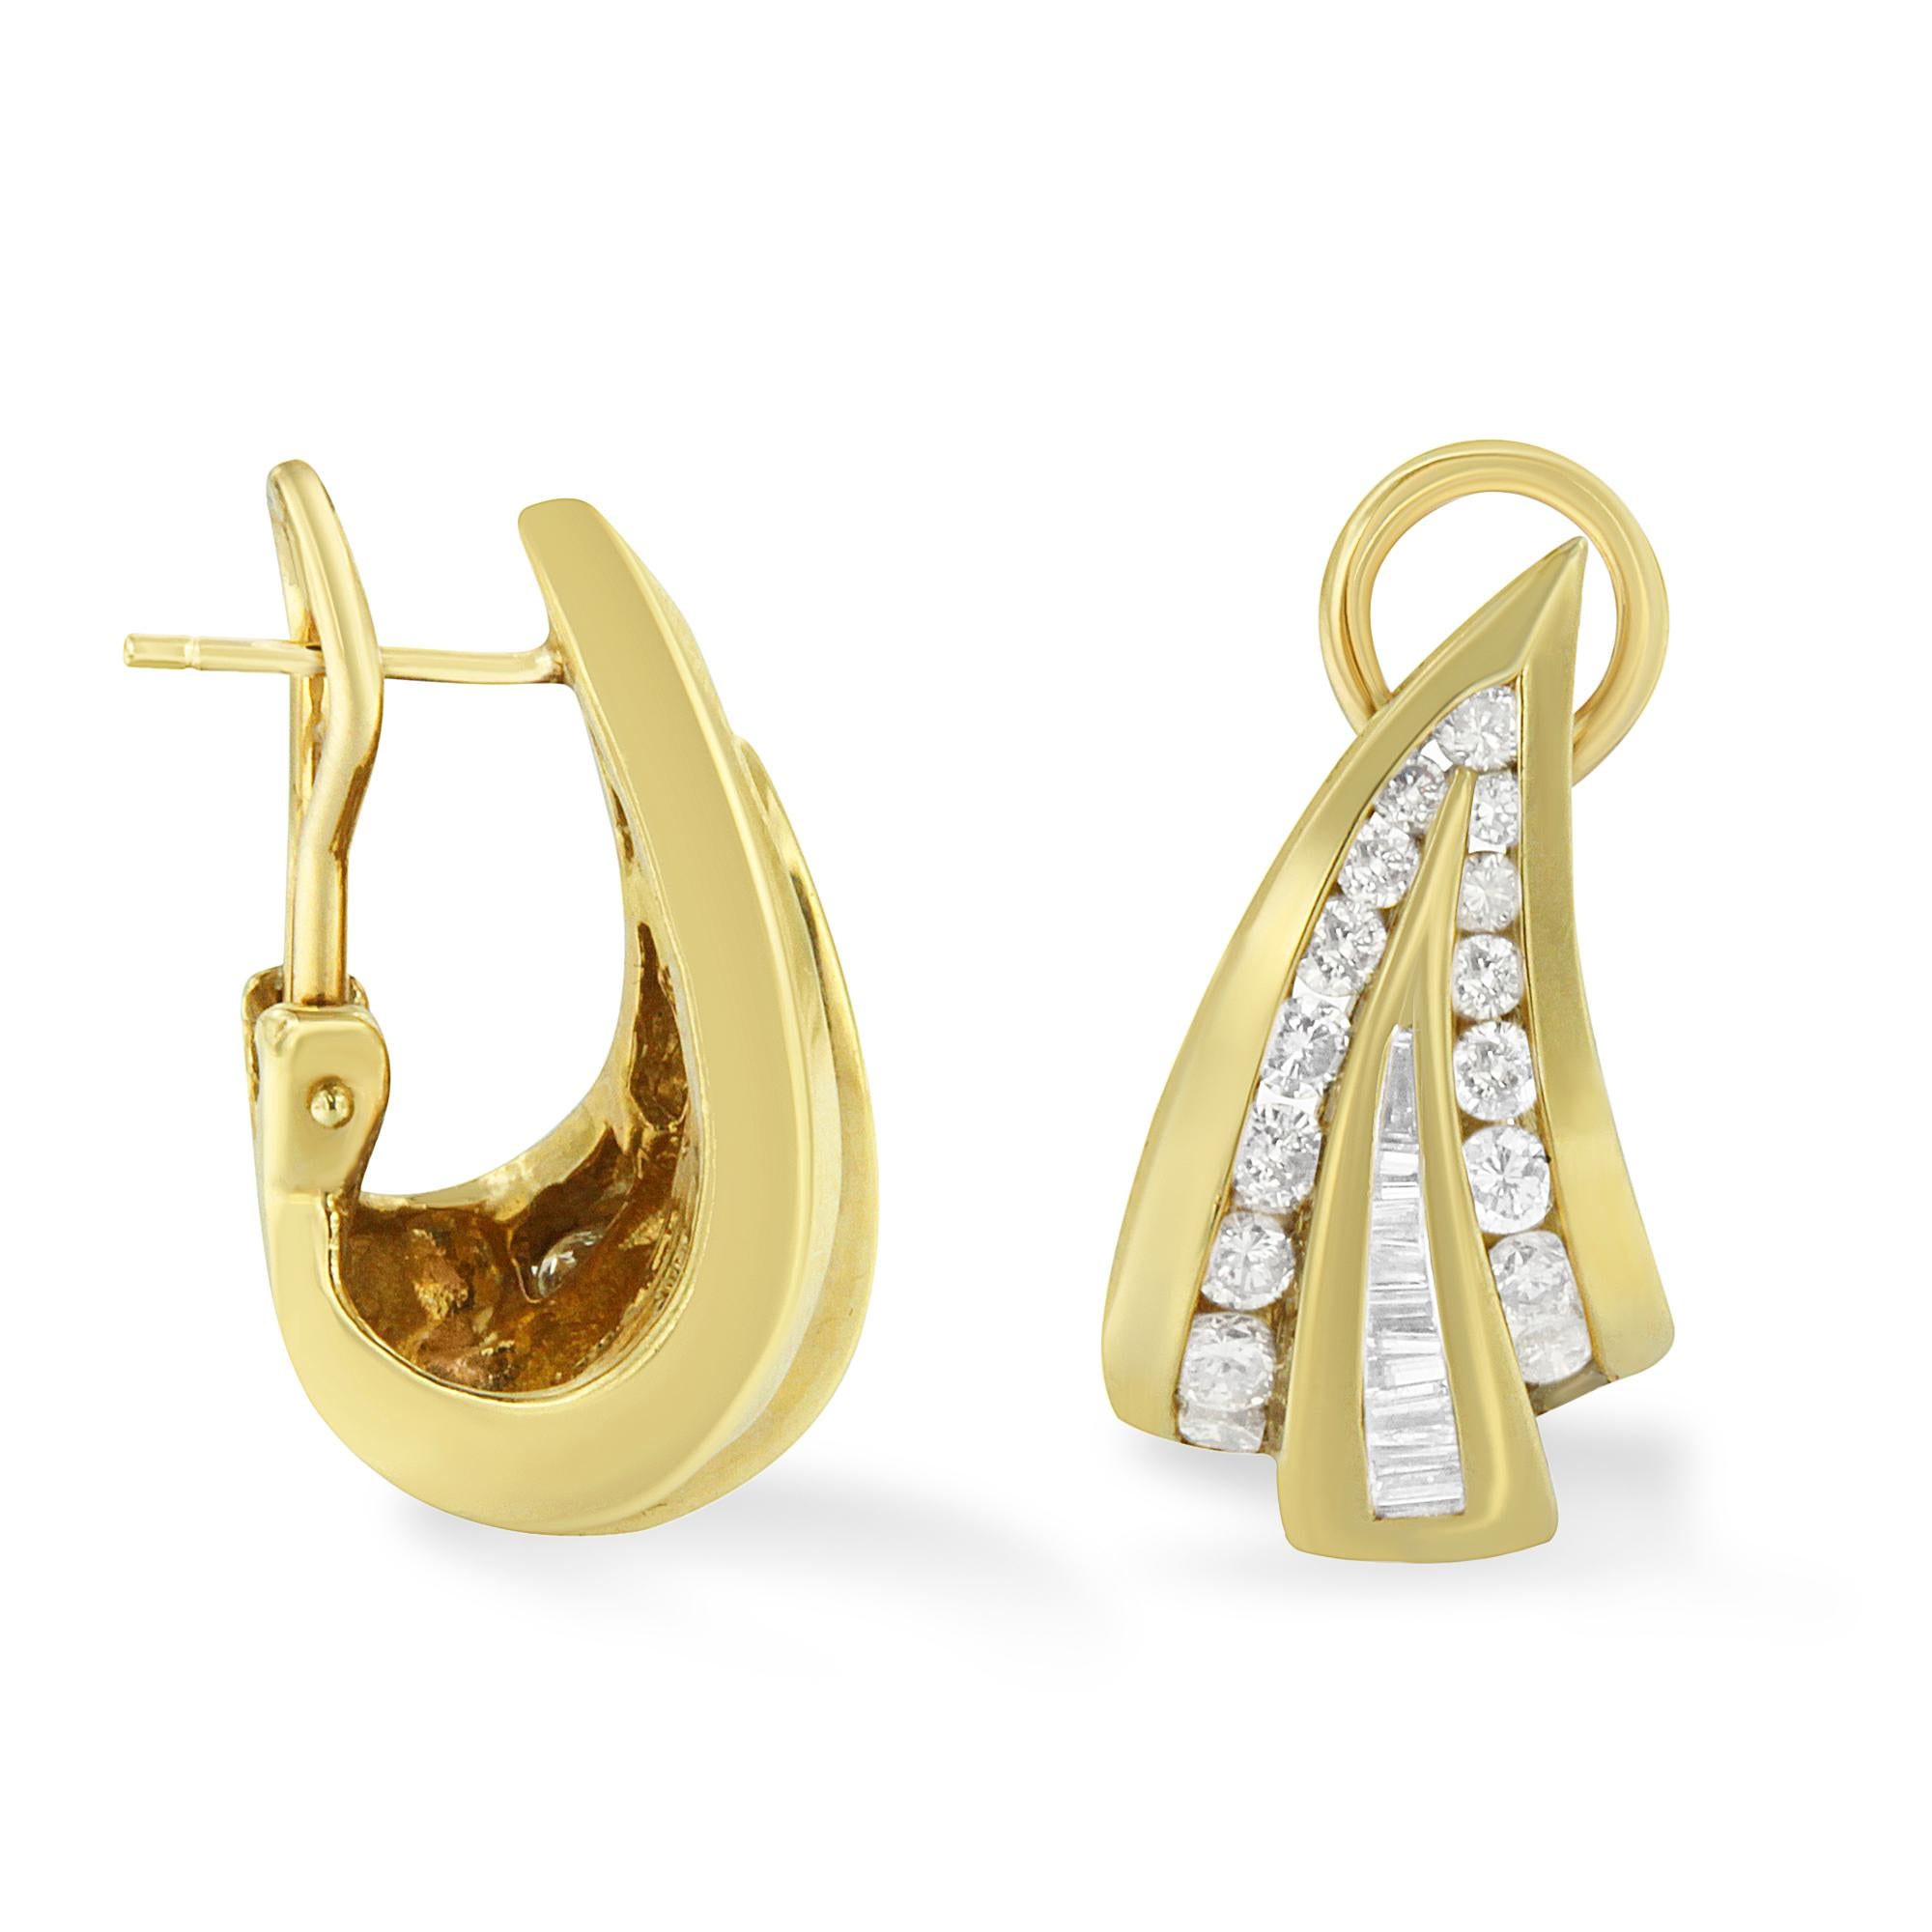 Treat her to this pair of sweeping huggie earrings cast in high quality 14k yellow gold and channel set with round cut and baguette diamonds.  The unique style is sure to appeal to many tastes.  An omega clasp will keep these treasures secure.